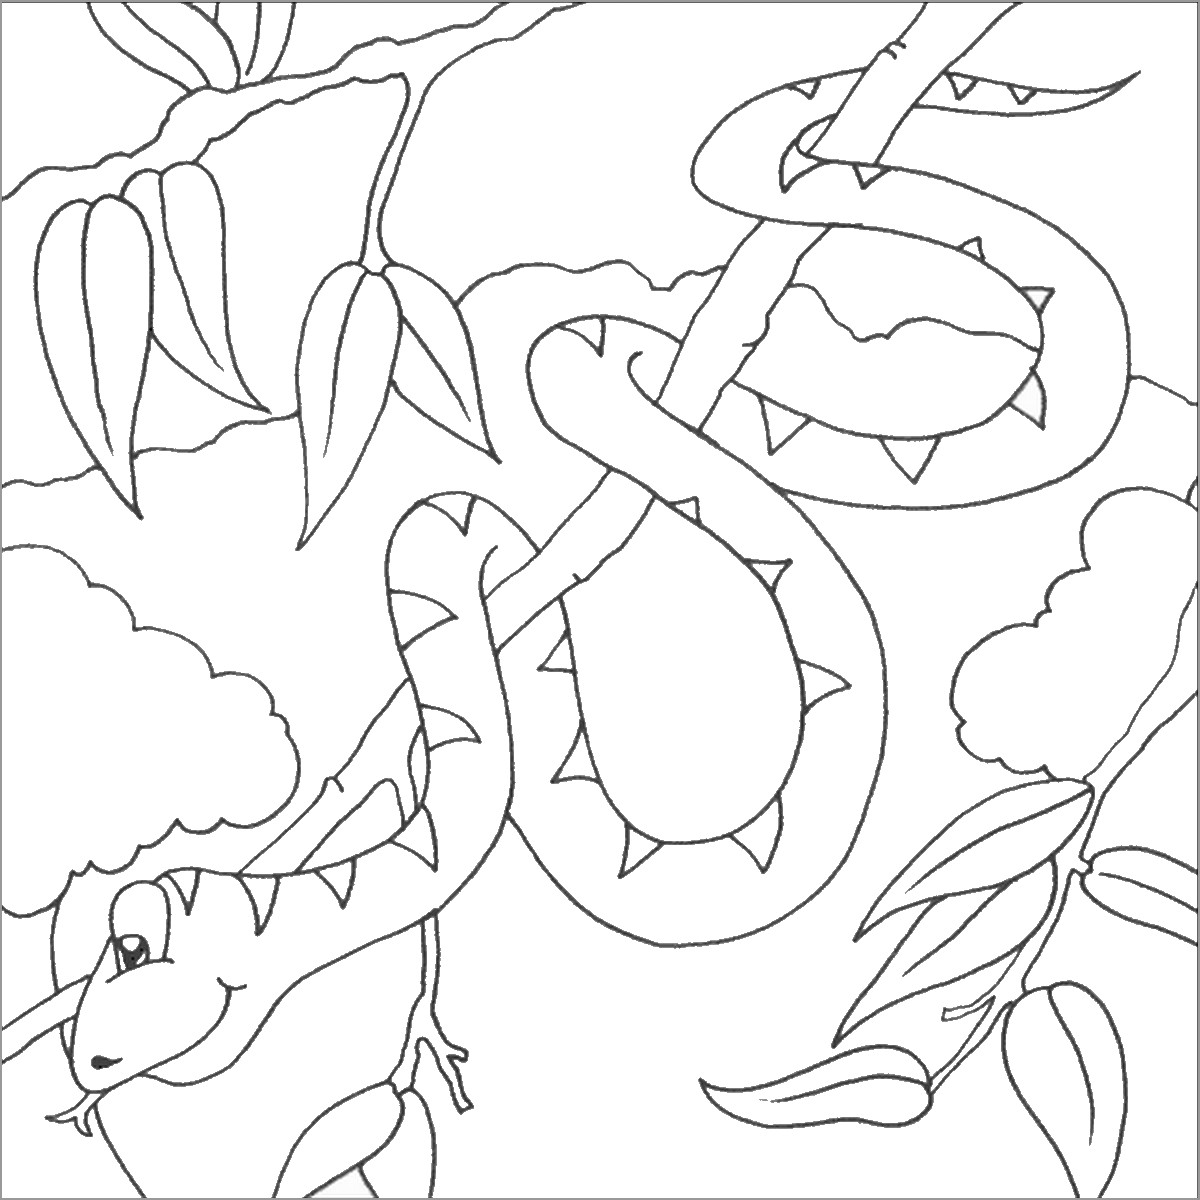 Snake On the Branch Tree Coloring Page - ColoringBay